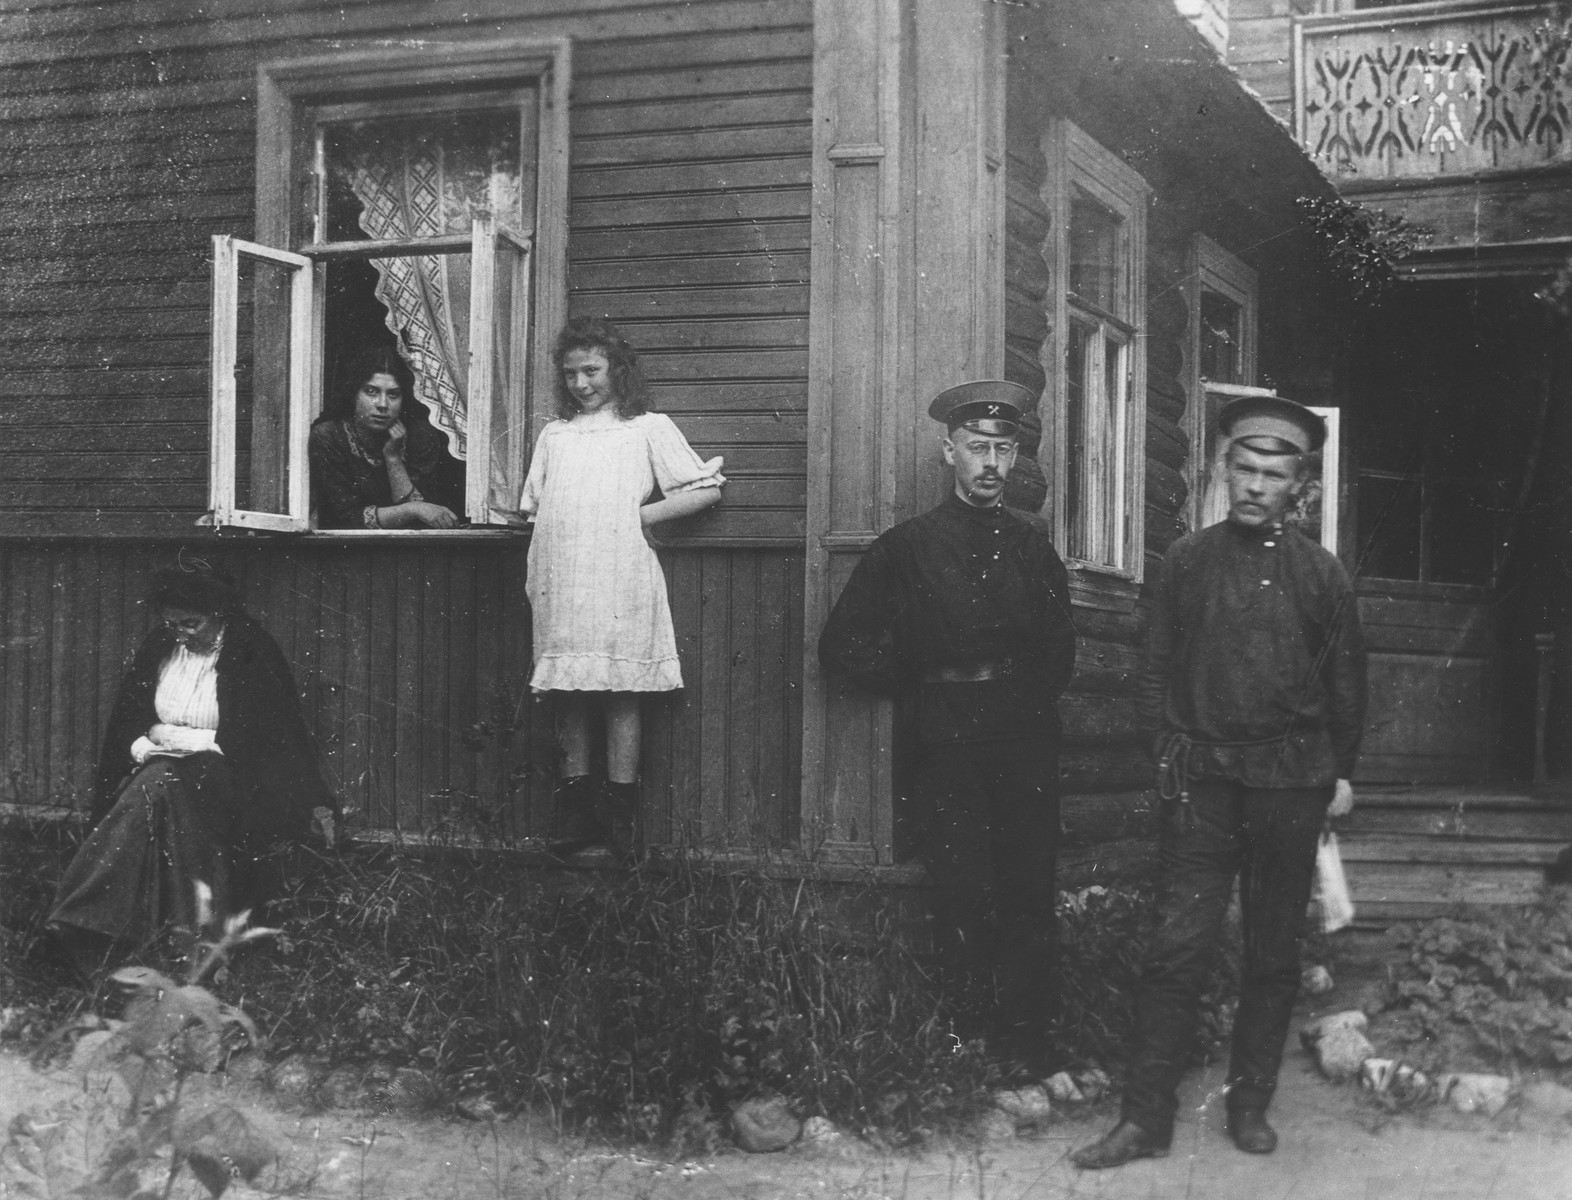 Members of the Mikolaevsky family at their dacha in the village of Strelna, a suburb of St. Petersburg.